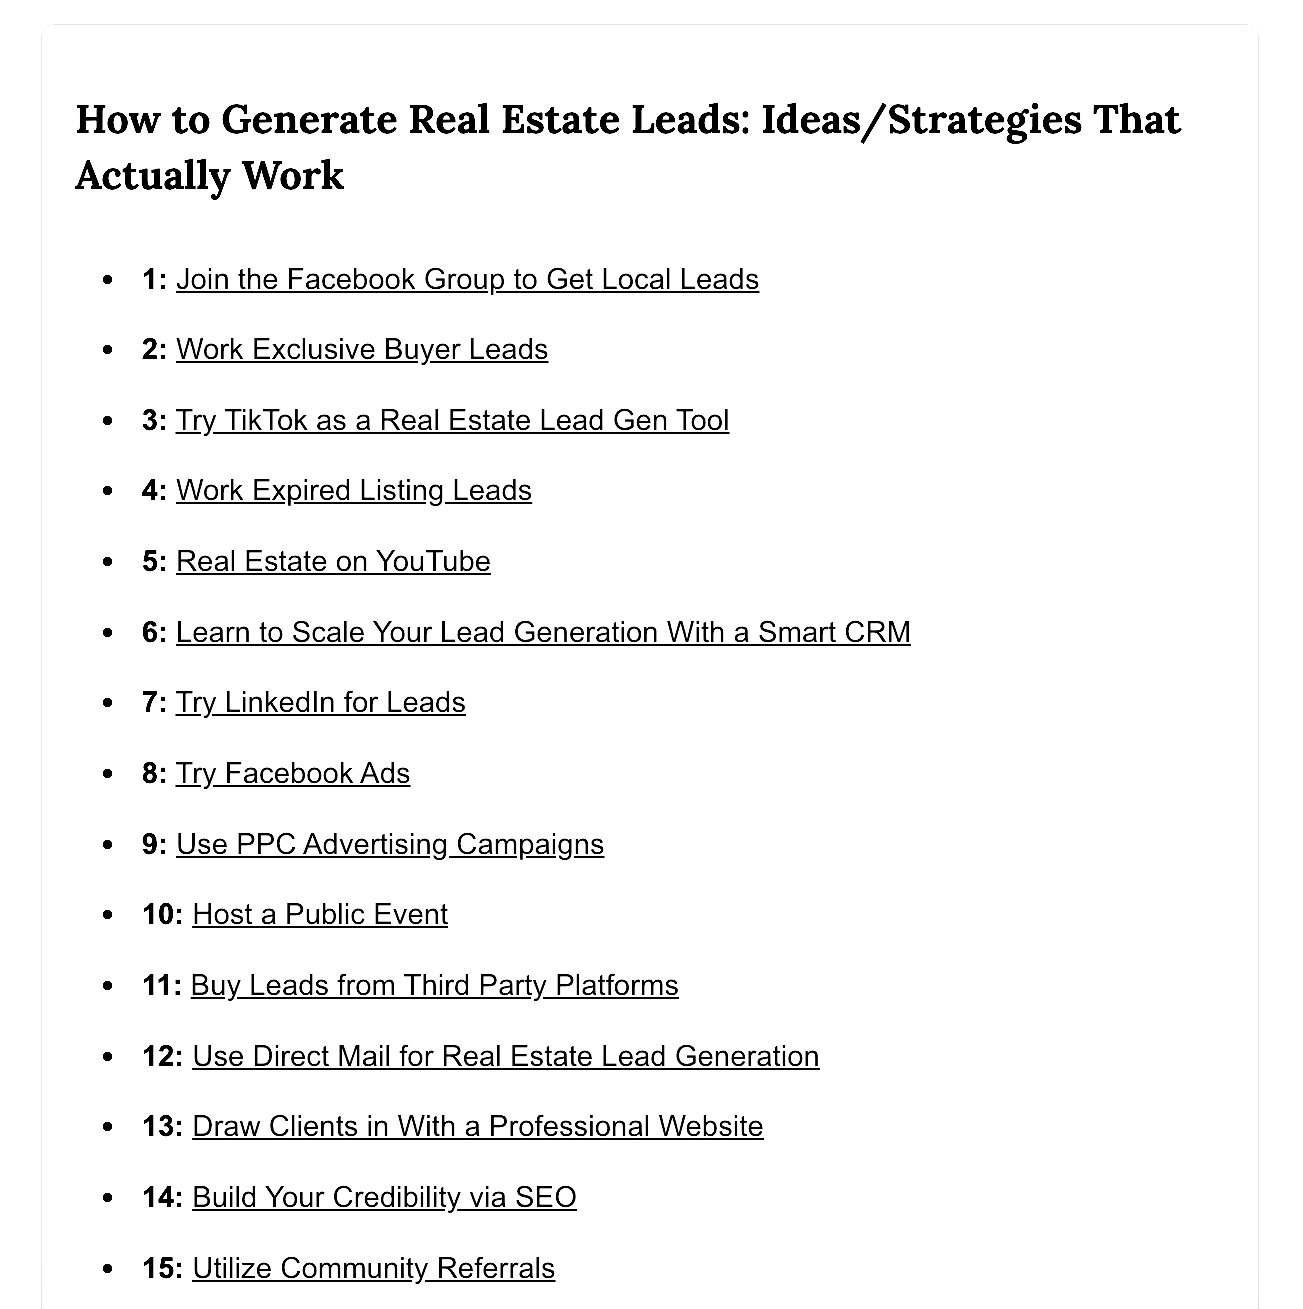 A list about how to find real estate leads.